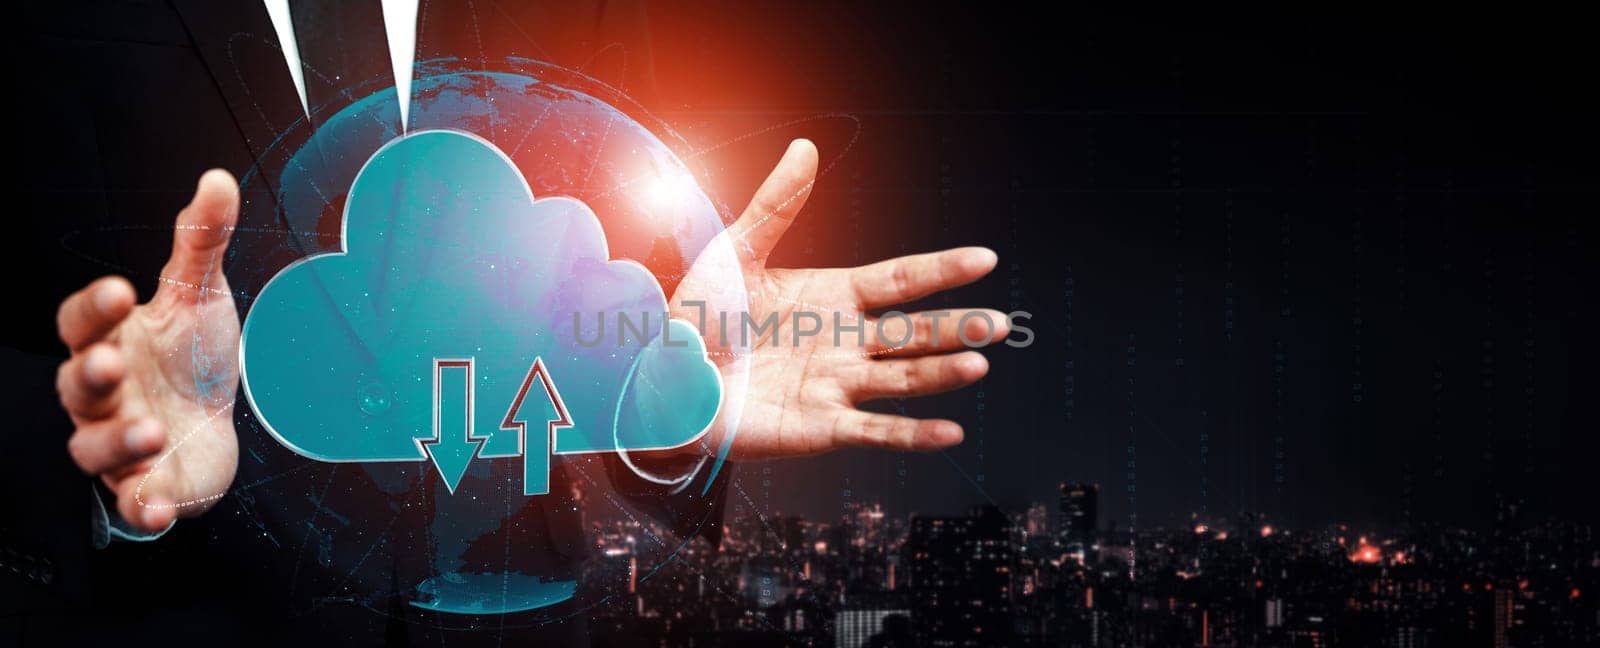 Cloud computing technology and online data storage for business network concept. Computer connects to internet server service for cloud data transfer presented in 3D futuristic graphic interface. uds